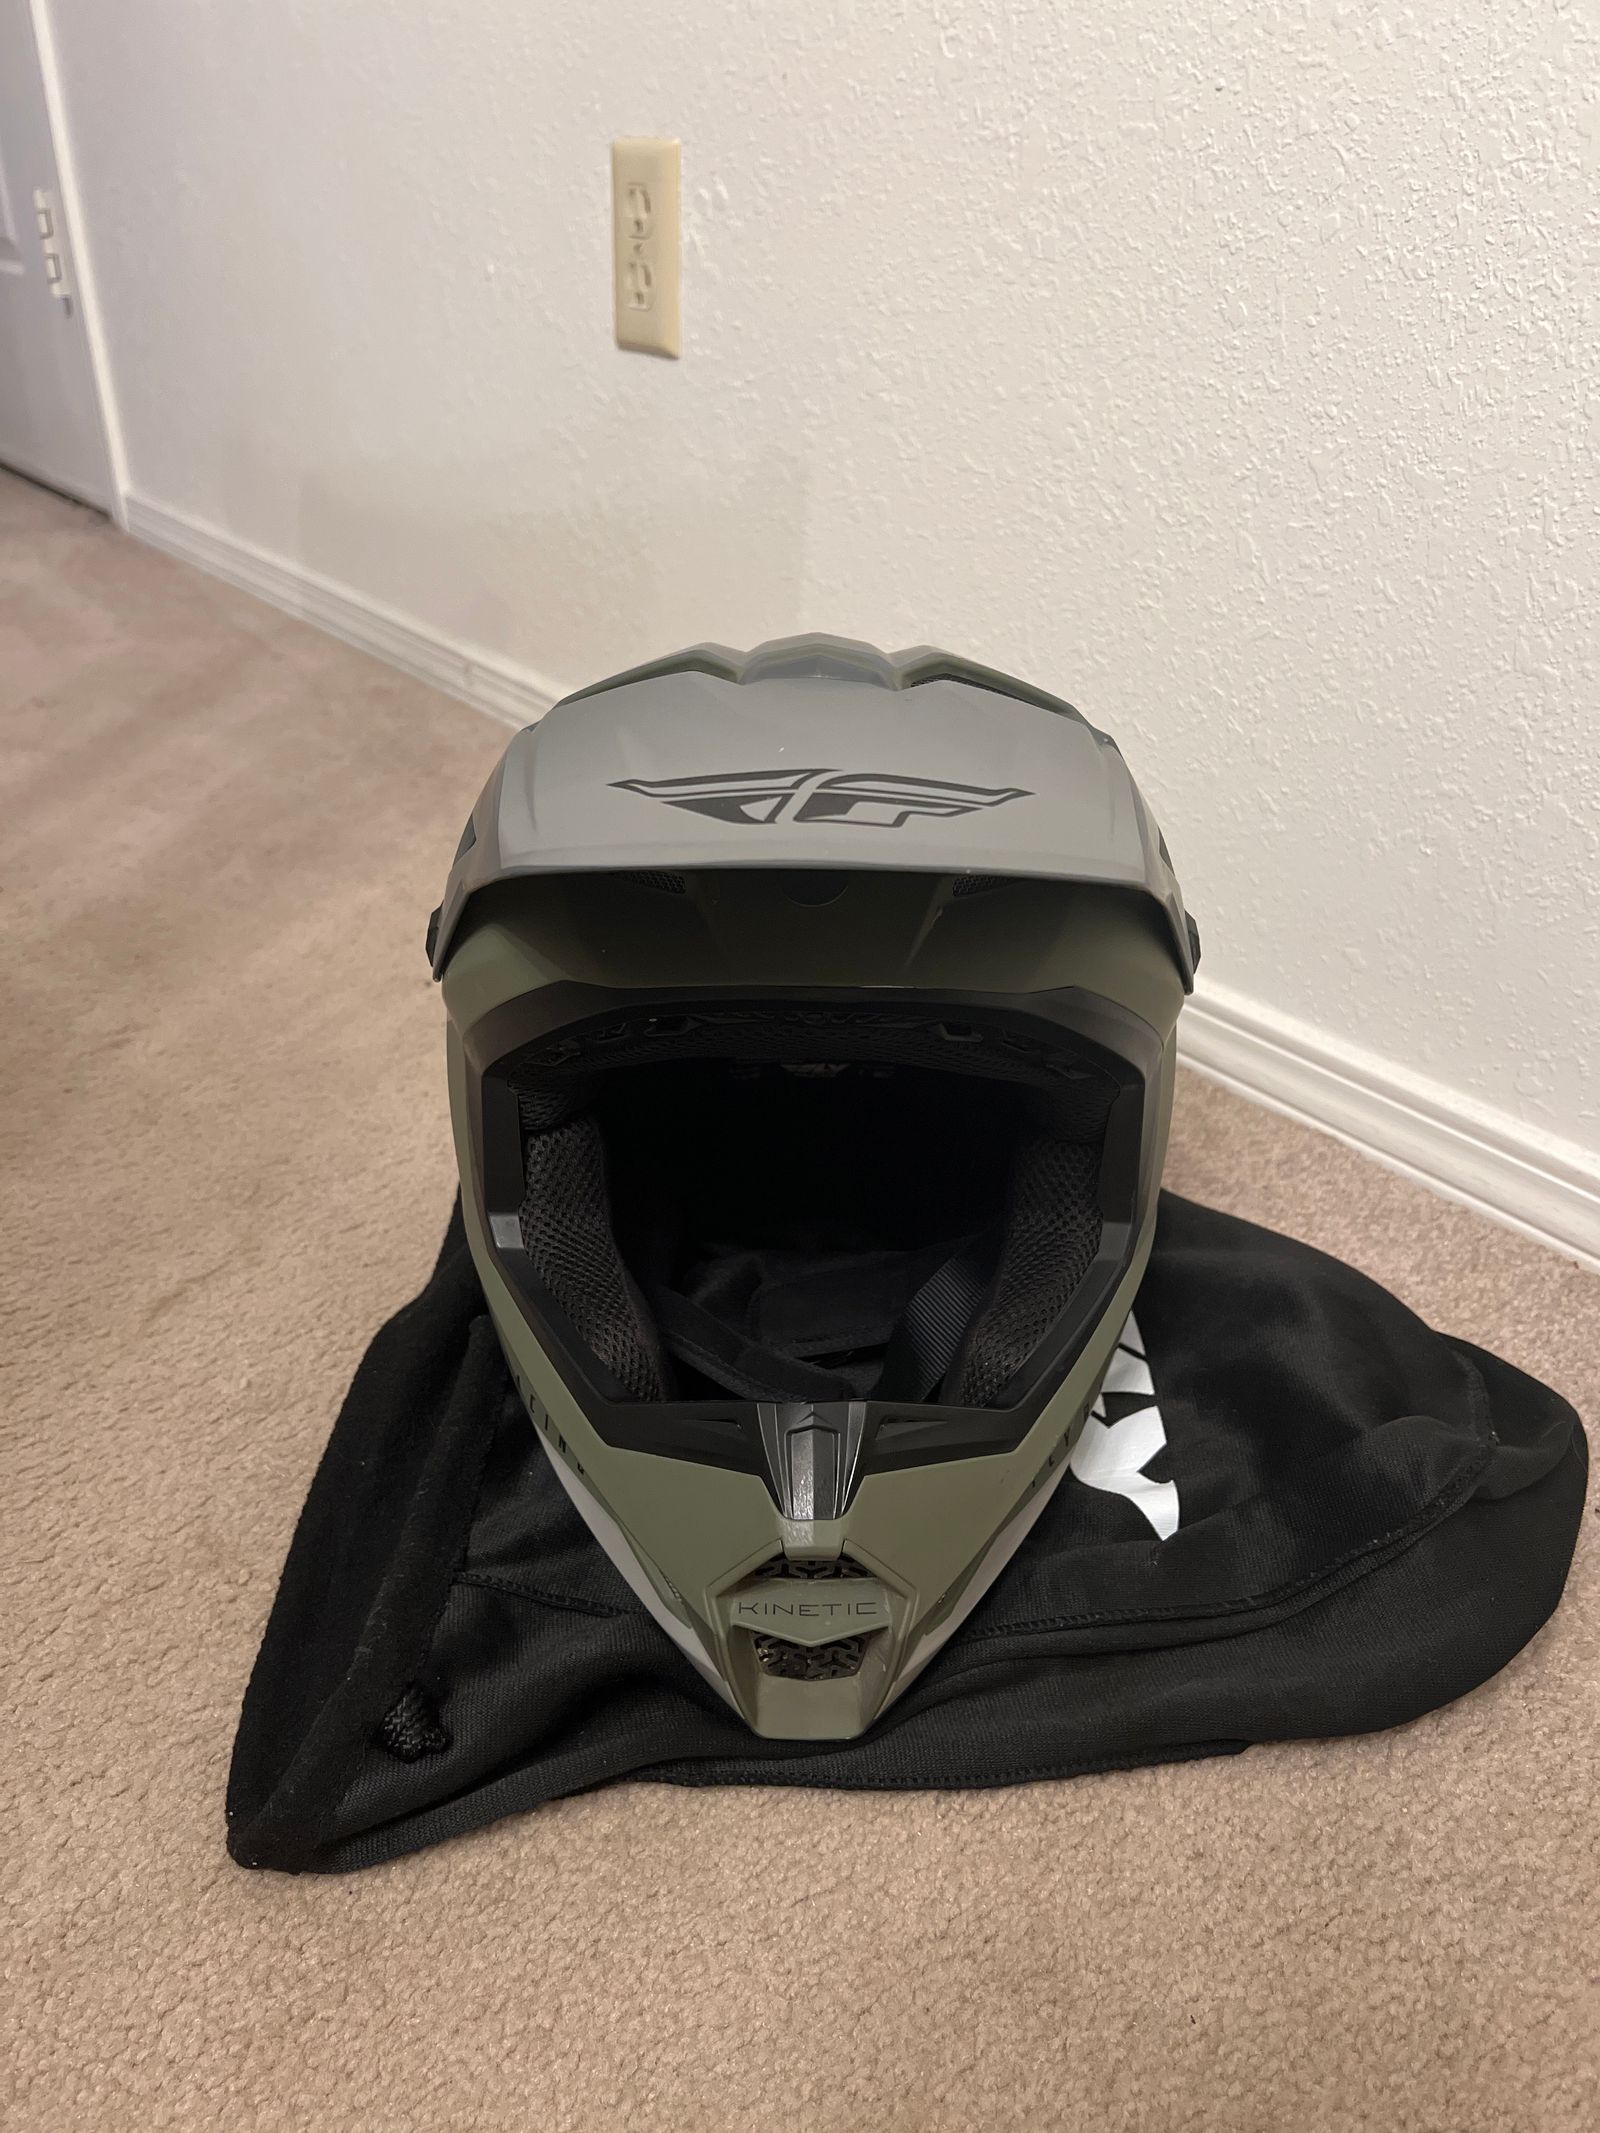 Fly Racing Helmets - Size L